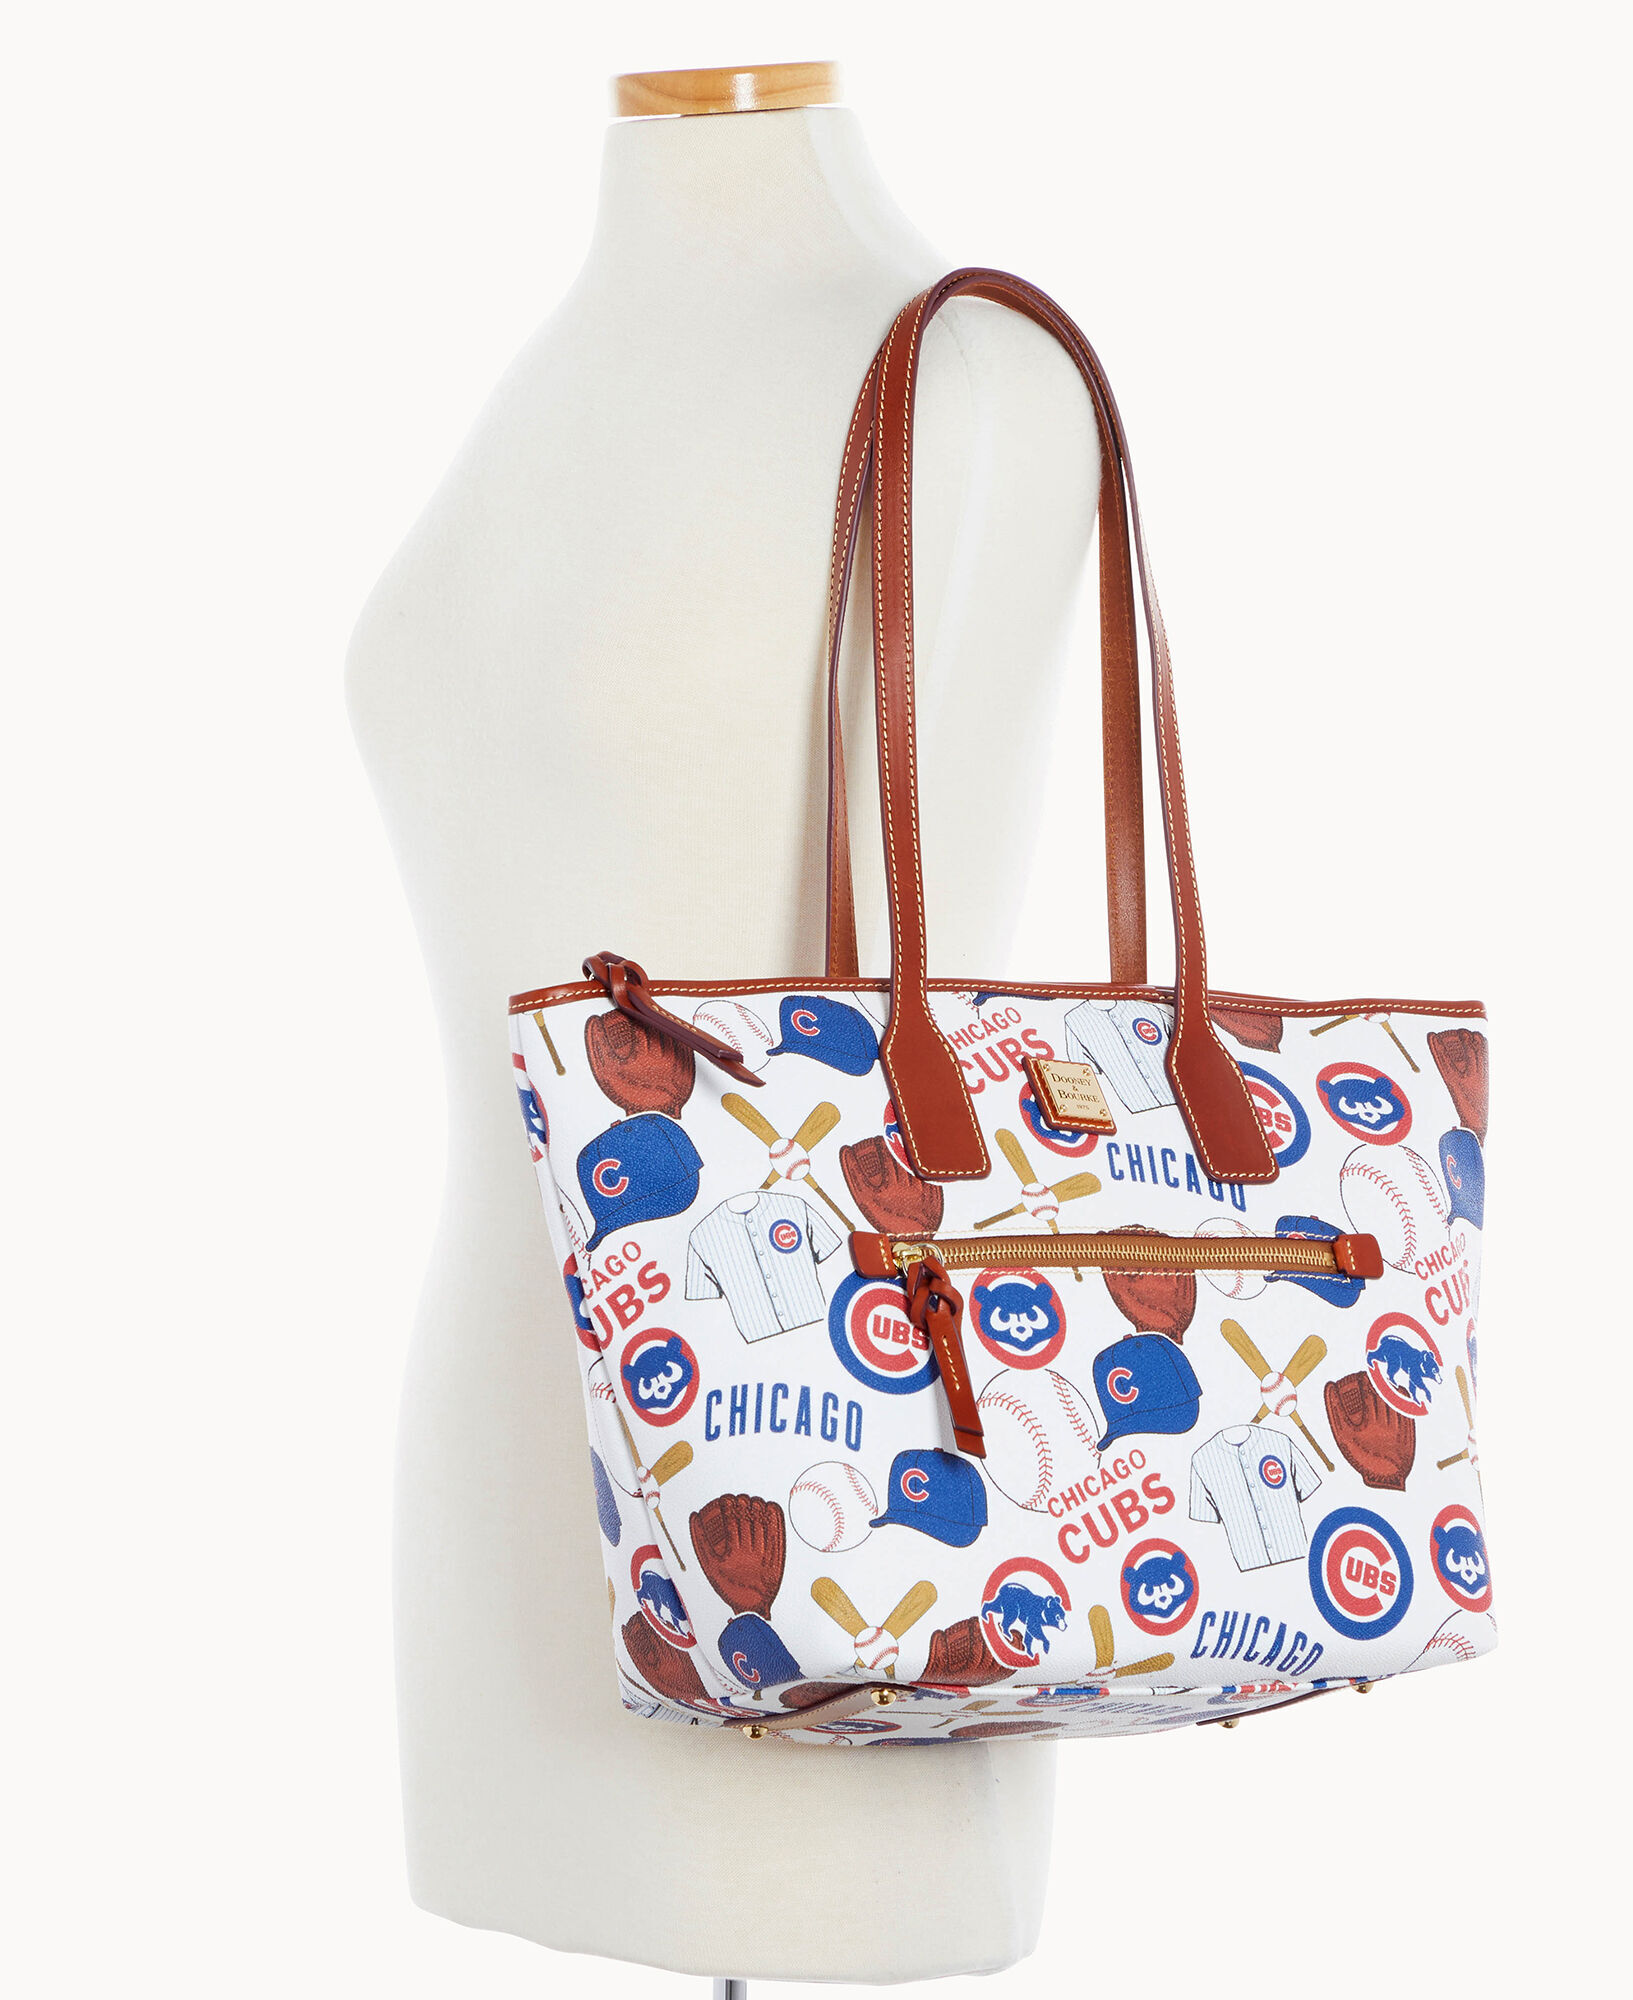 Chicago Cubs Bags  Dooney & Bourke Cheap For Womens & Mens